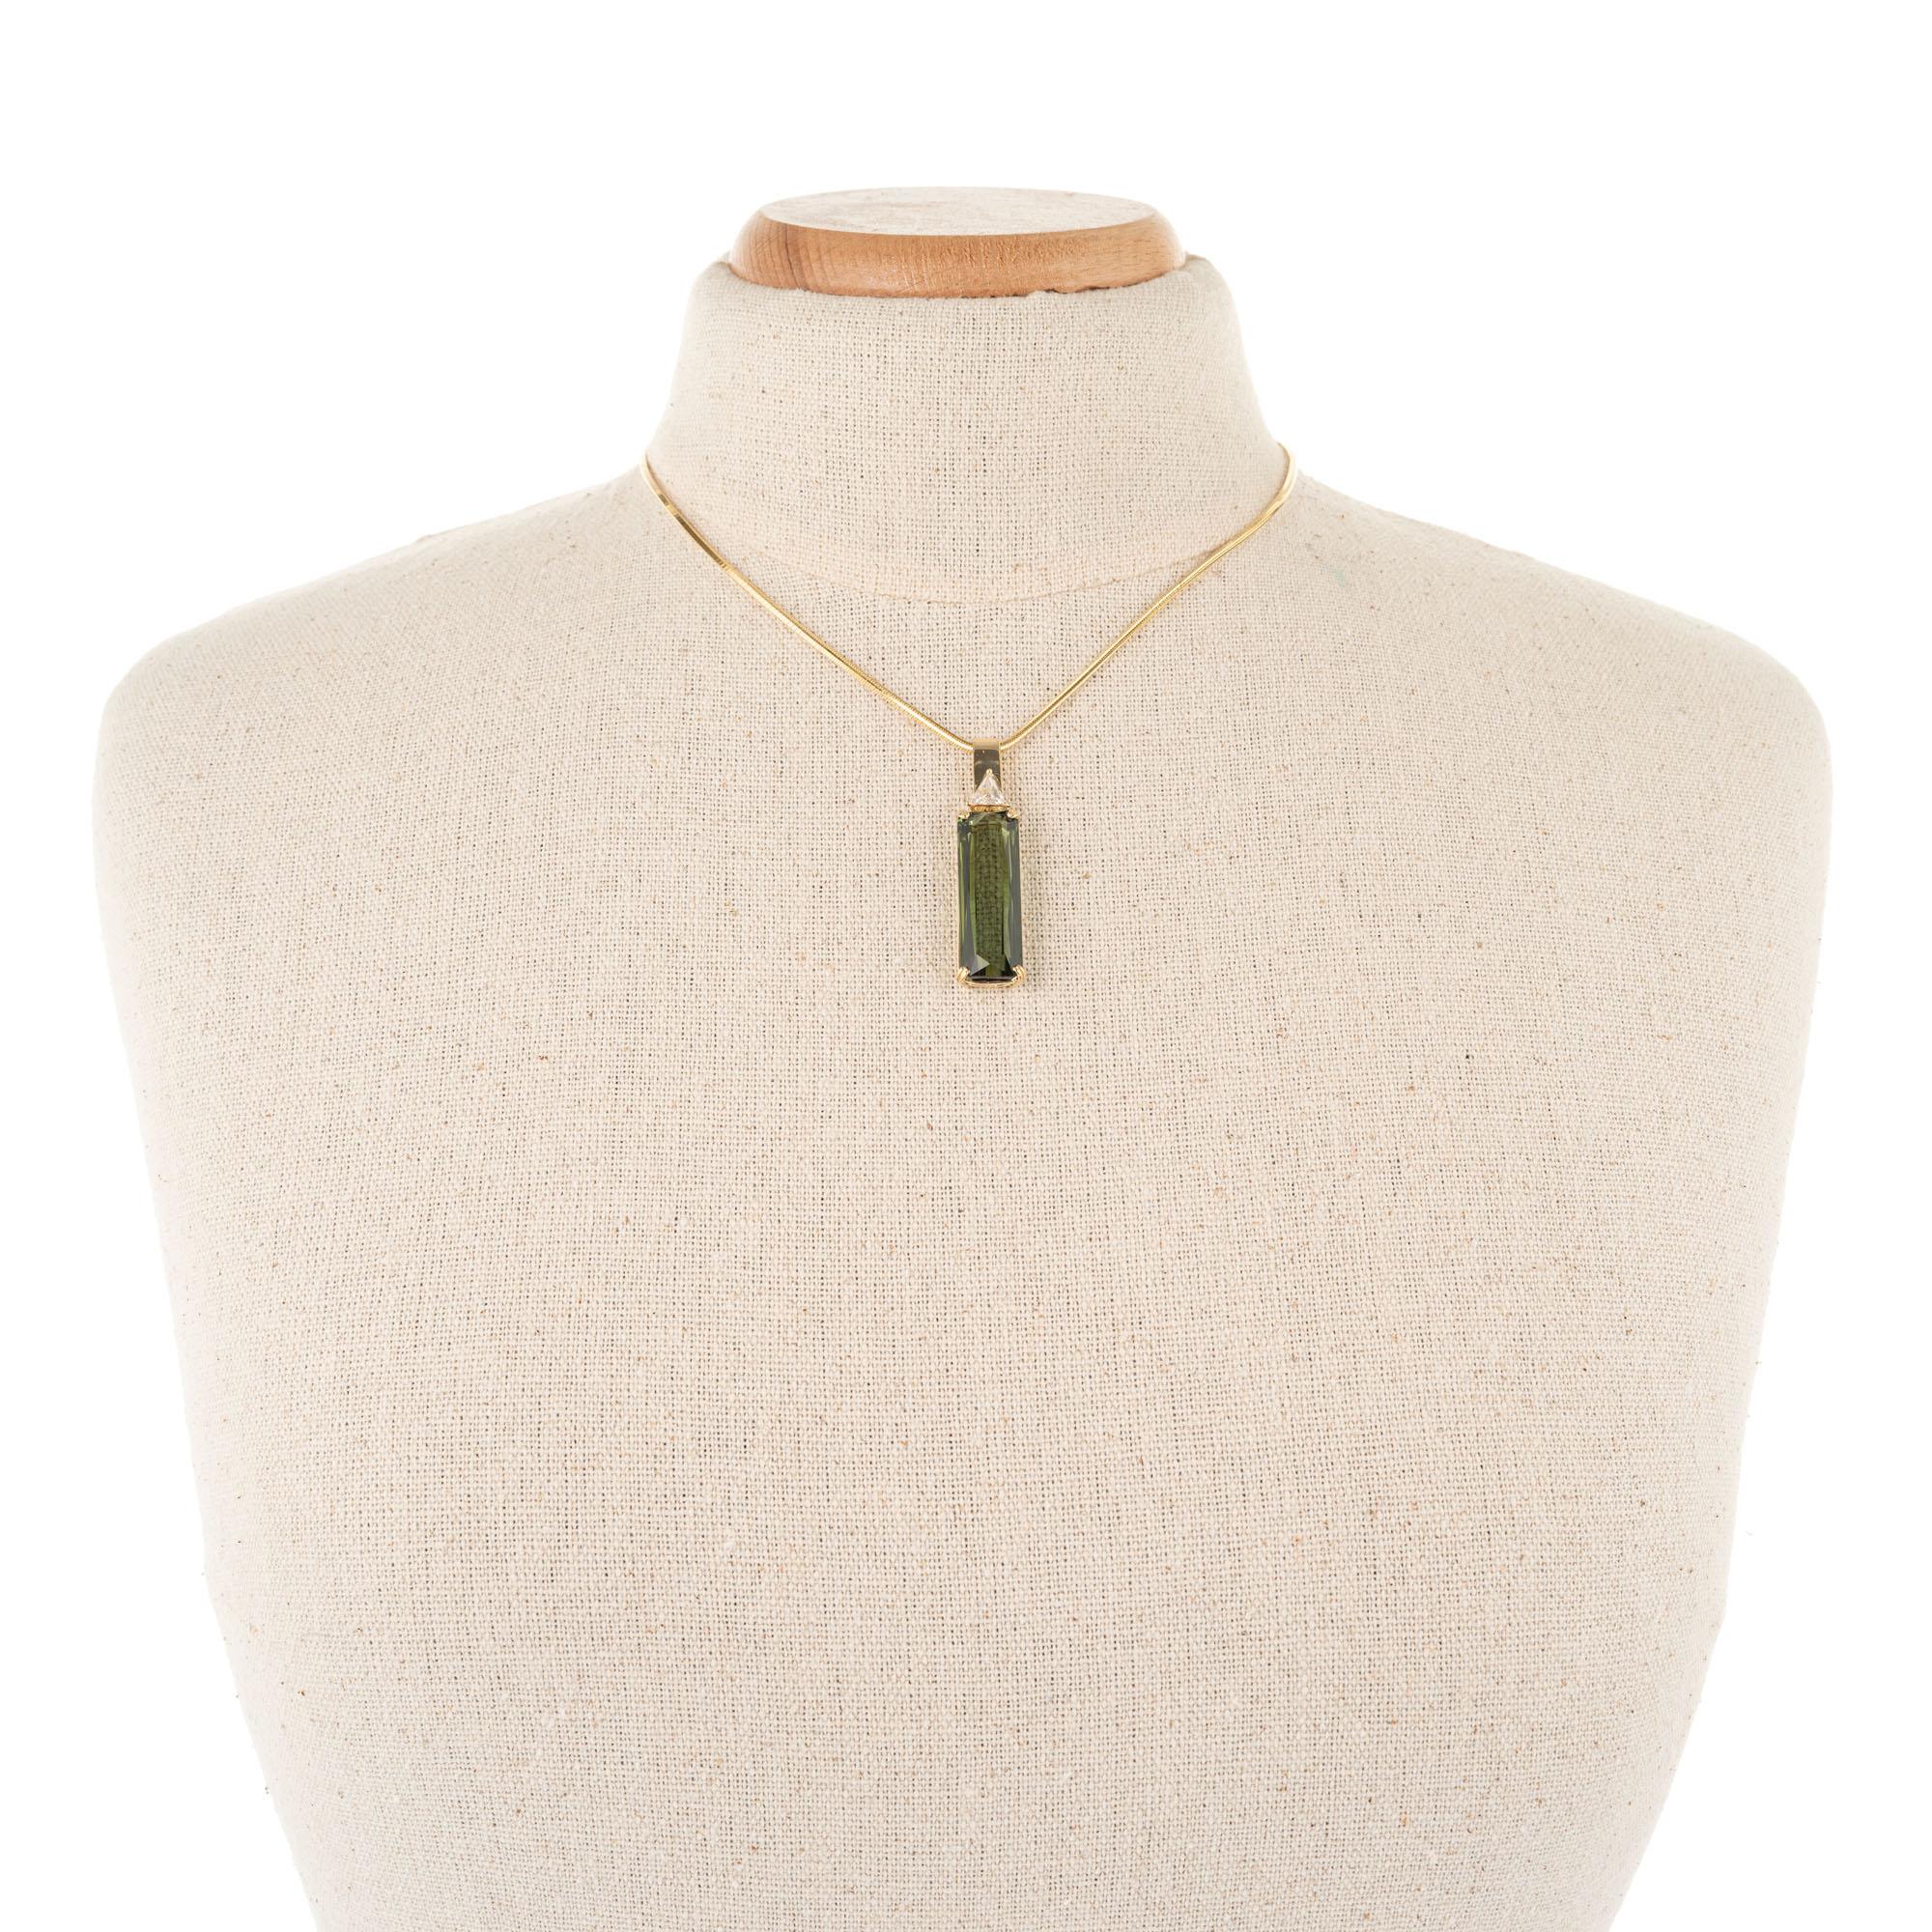 Green cylinder tourmaline and trilliant cut accent diamond. 14k yellow gold pendant necklace, made in the Peter Suchy Workshop.

1 cylinder green VS tourmaline, Approximate 17.9cts
1 trilliant cut J SI2 diamond, Approximate .32cts
14k yellow